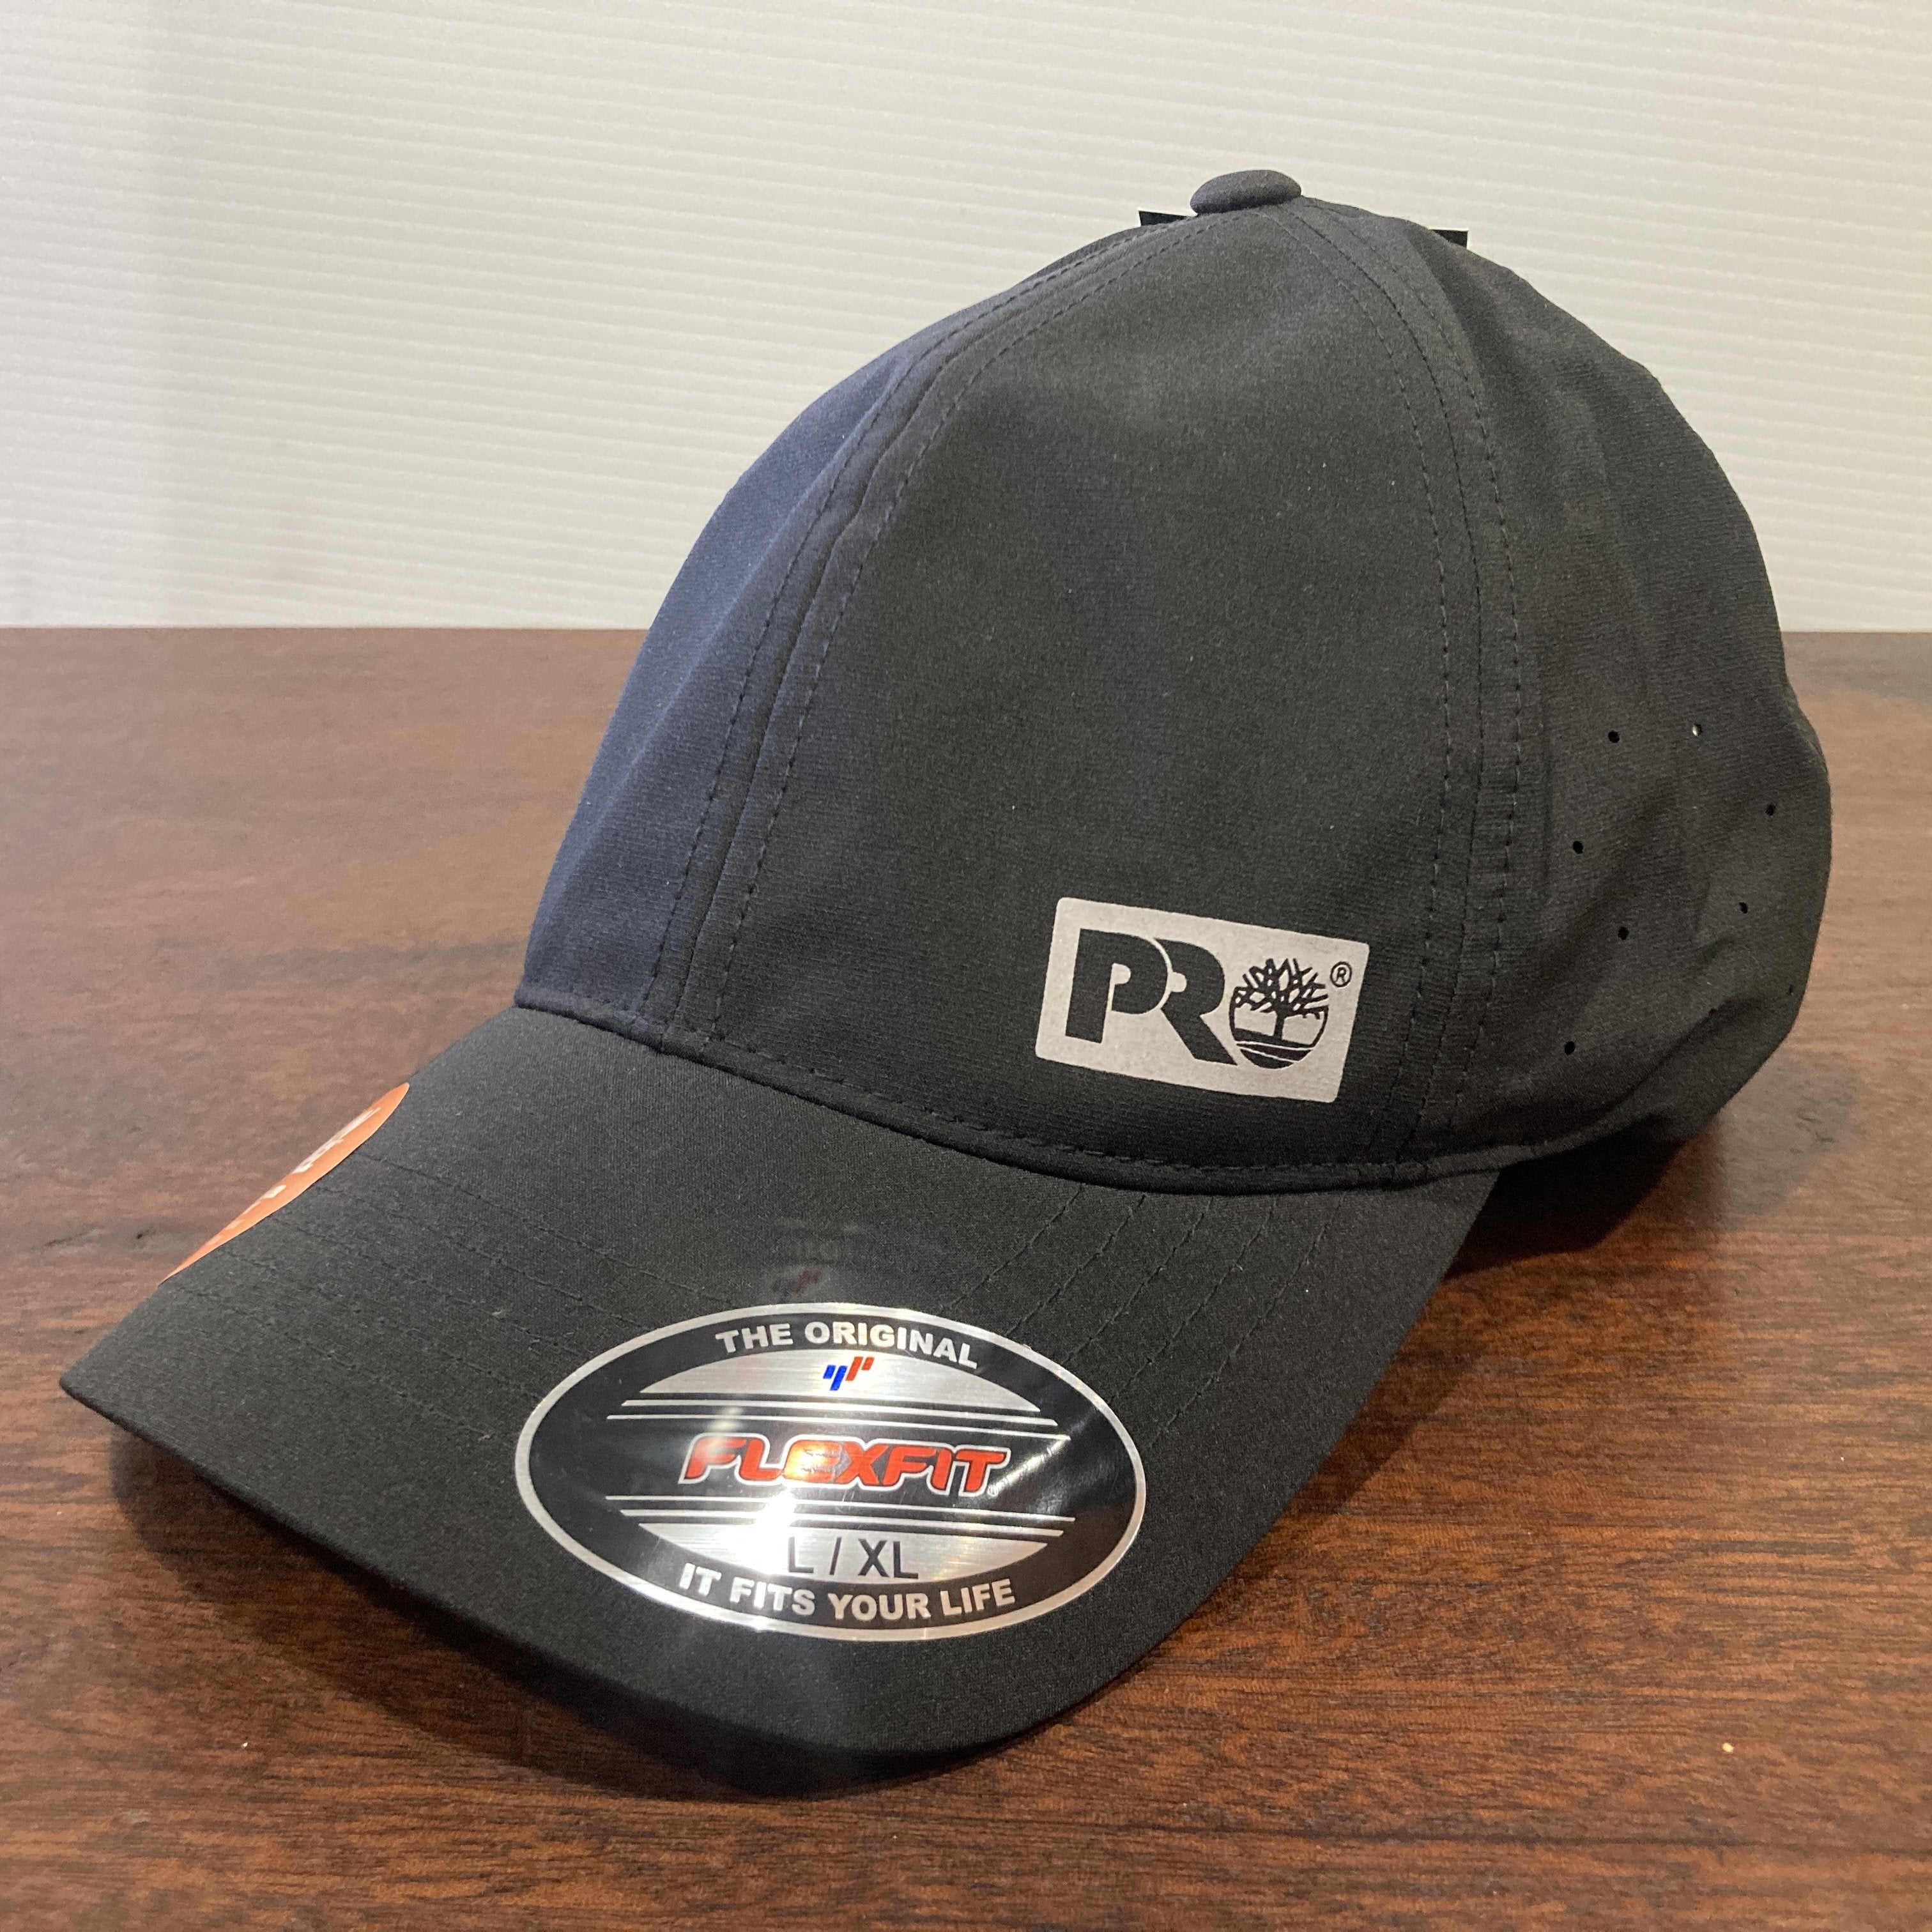 Outfitters Rose – Ltd. Performance North Pro Wind Hat Timberland